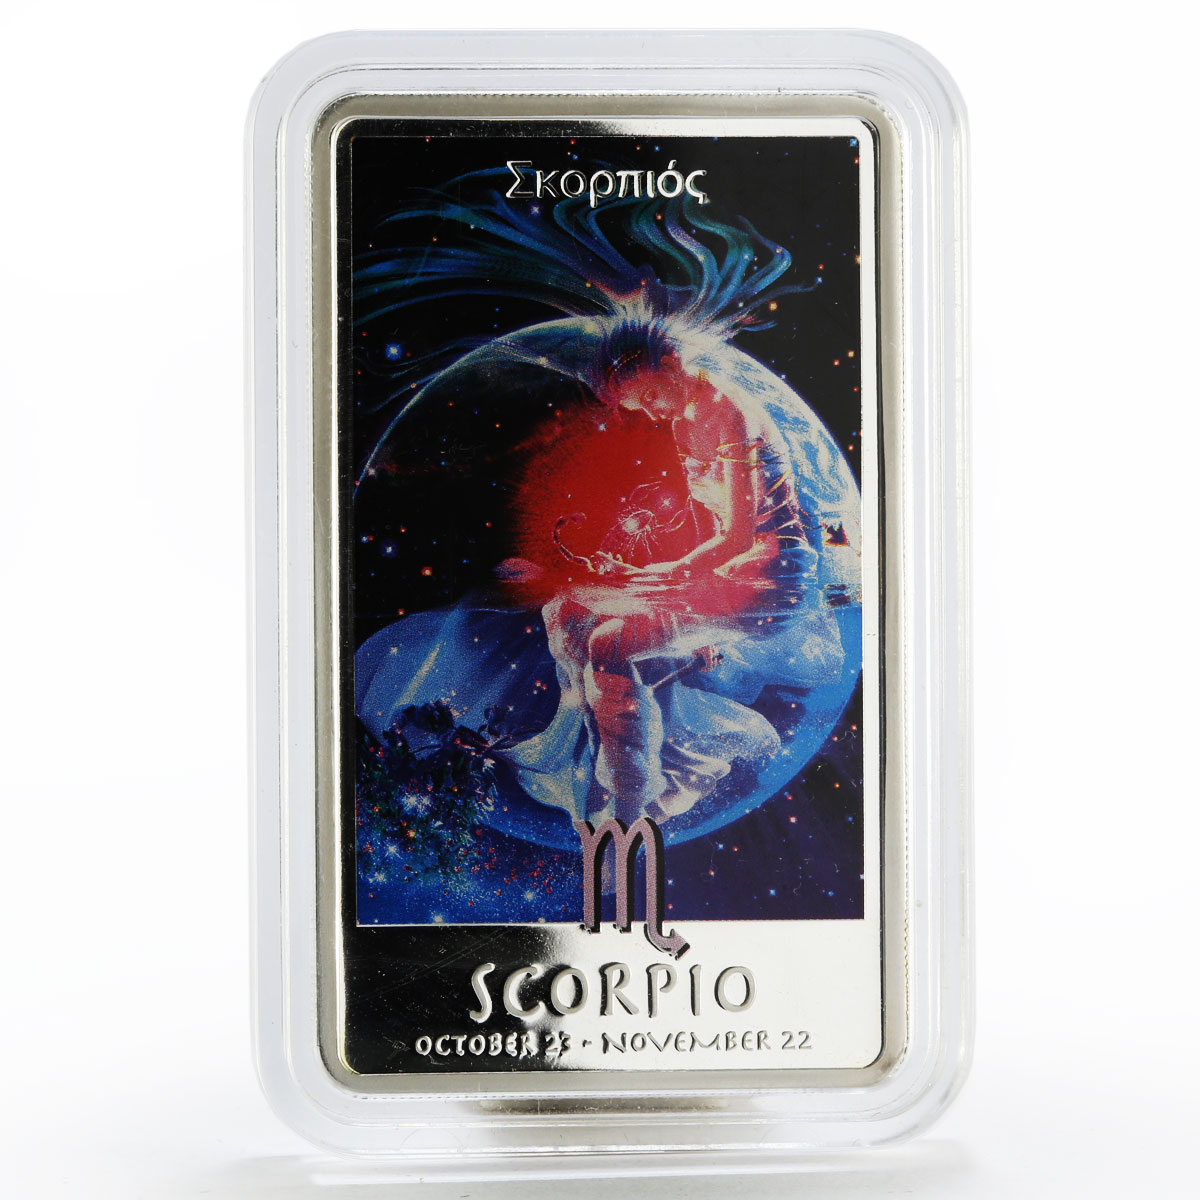 Niue 2 dollars Zodiac Signs series Scorpio colored proof silver coin 2011